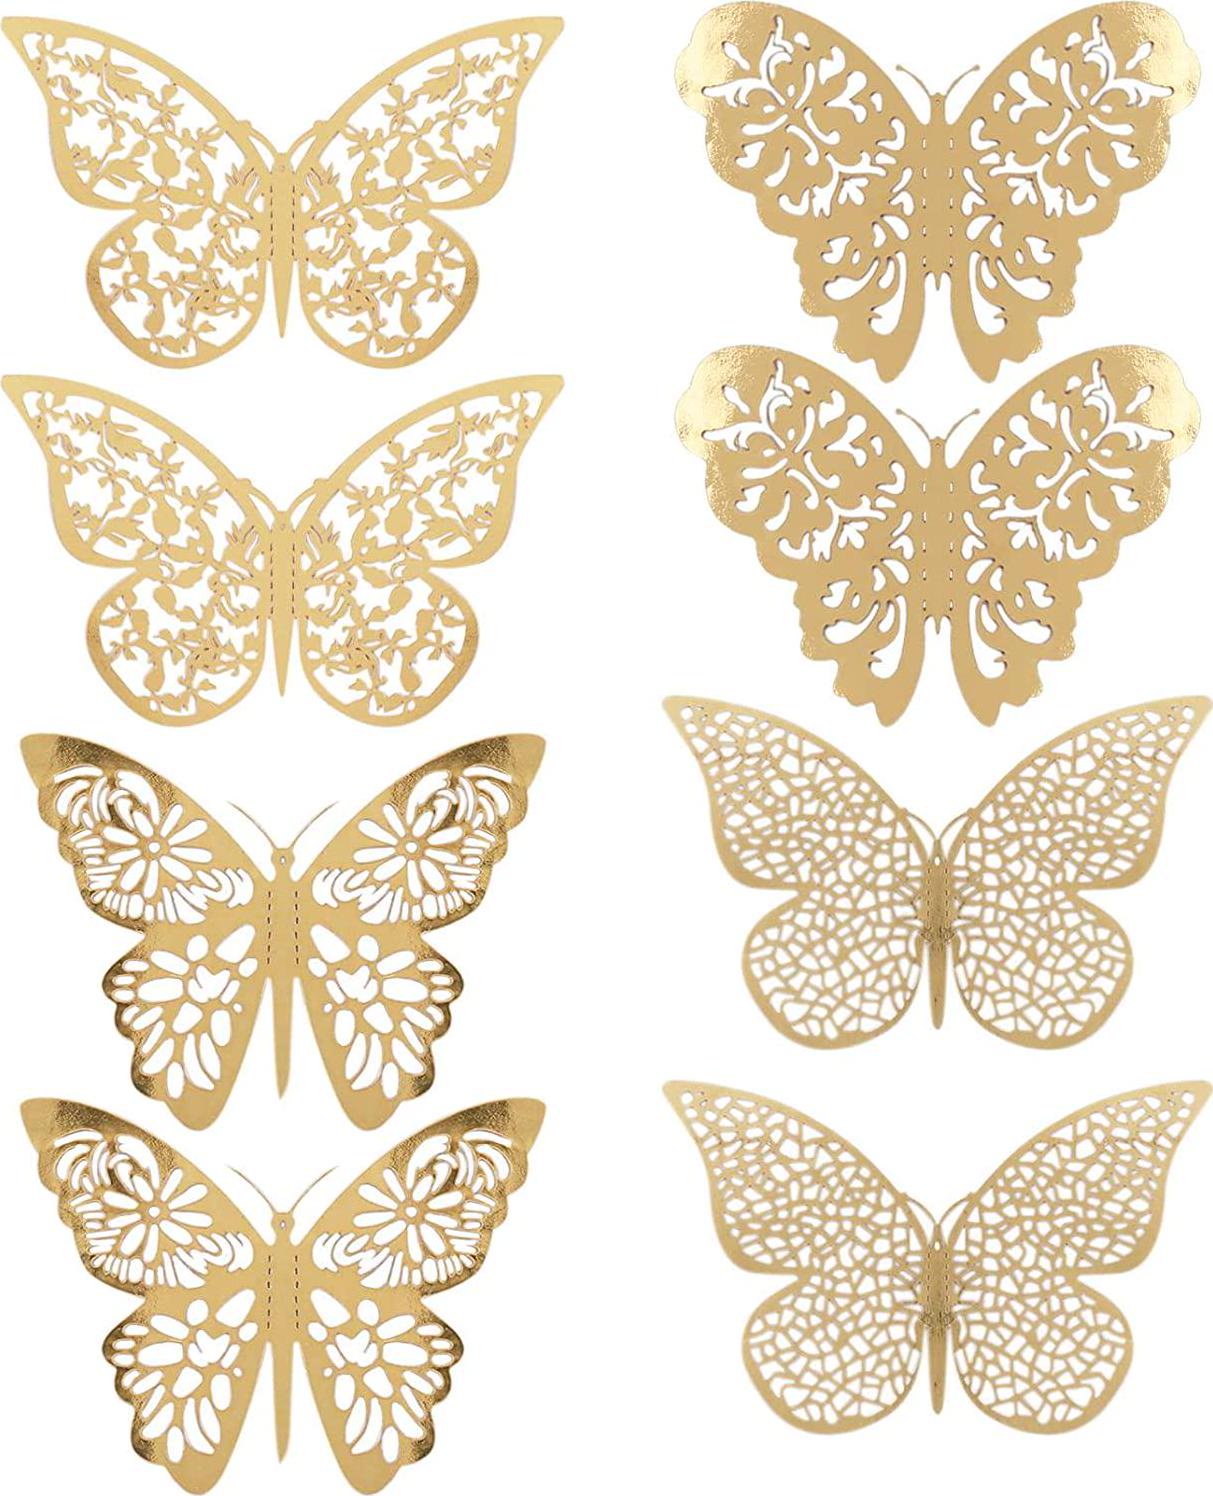 Lrtzizy, Lrtzizy 48 PCS 3D Butterfly Wall Decor Rose Gold Stickers 3D Hollow-Out Decorative DIY Home Decor Butterflies Decoration Bedroom